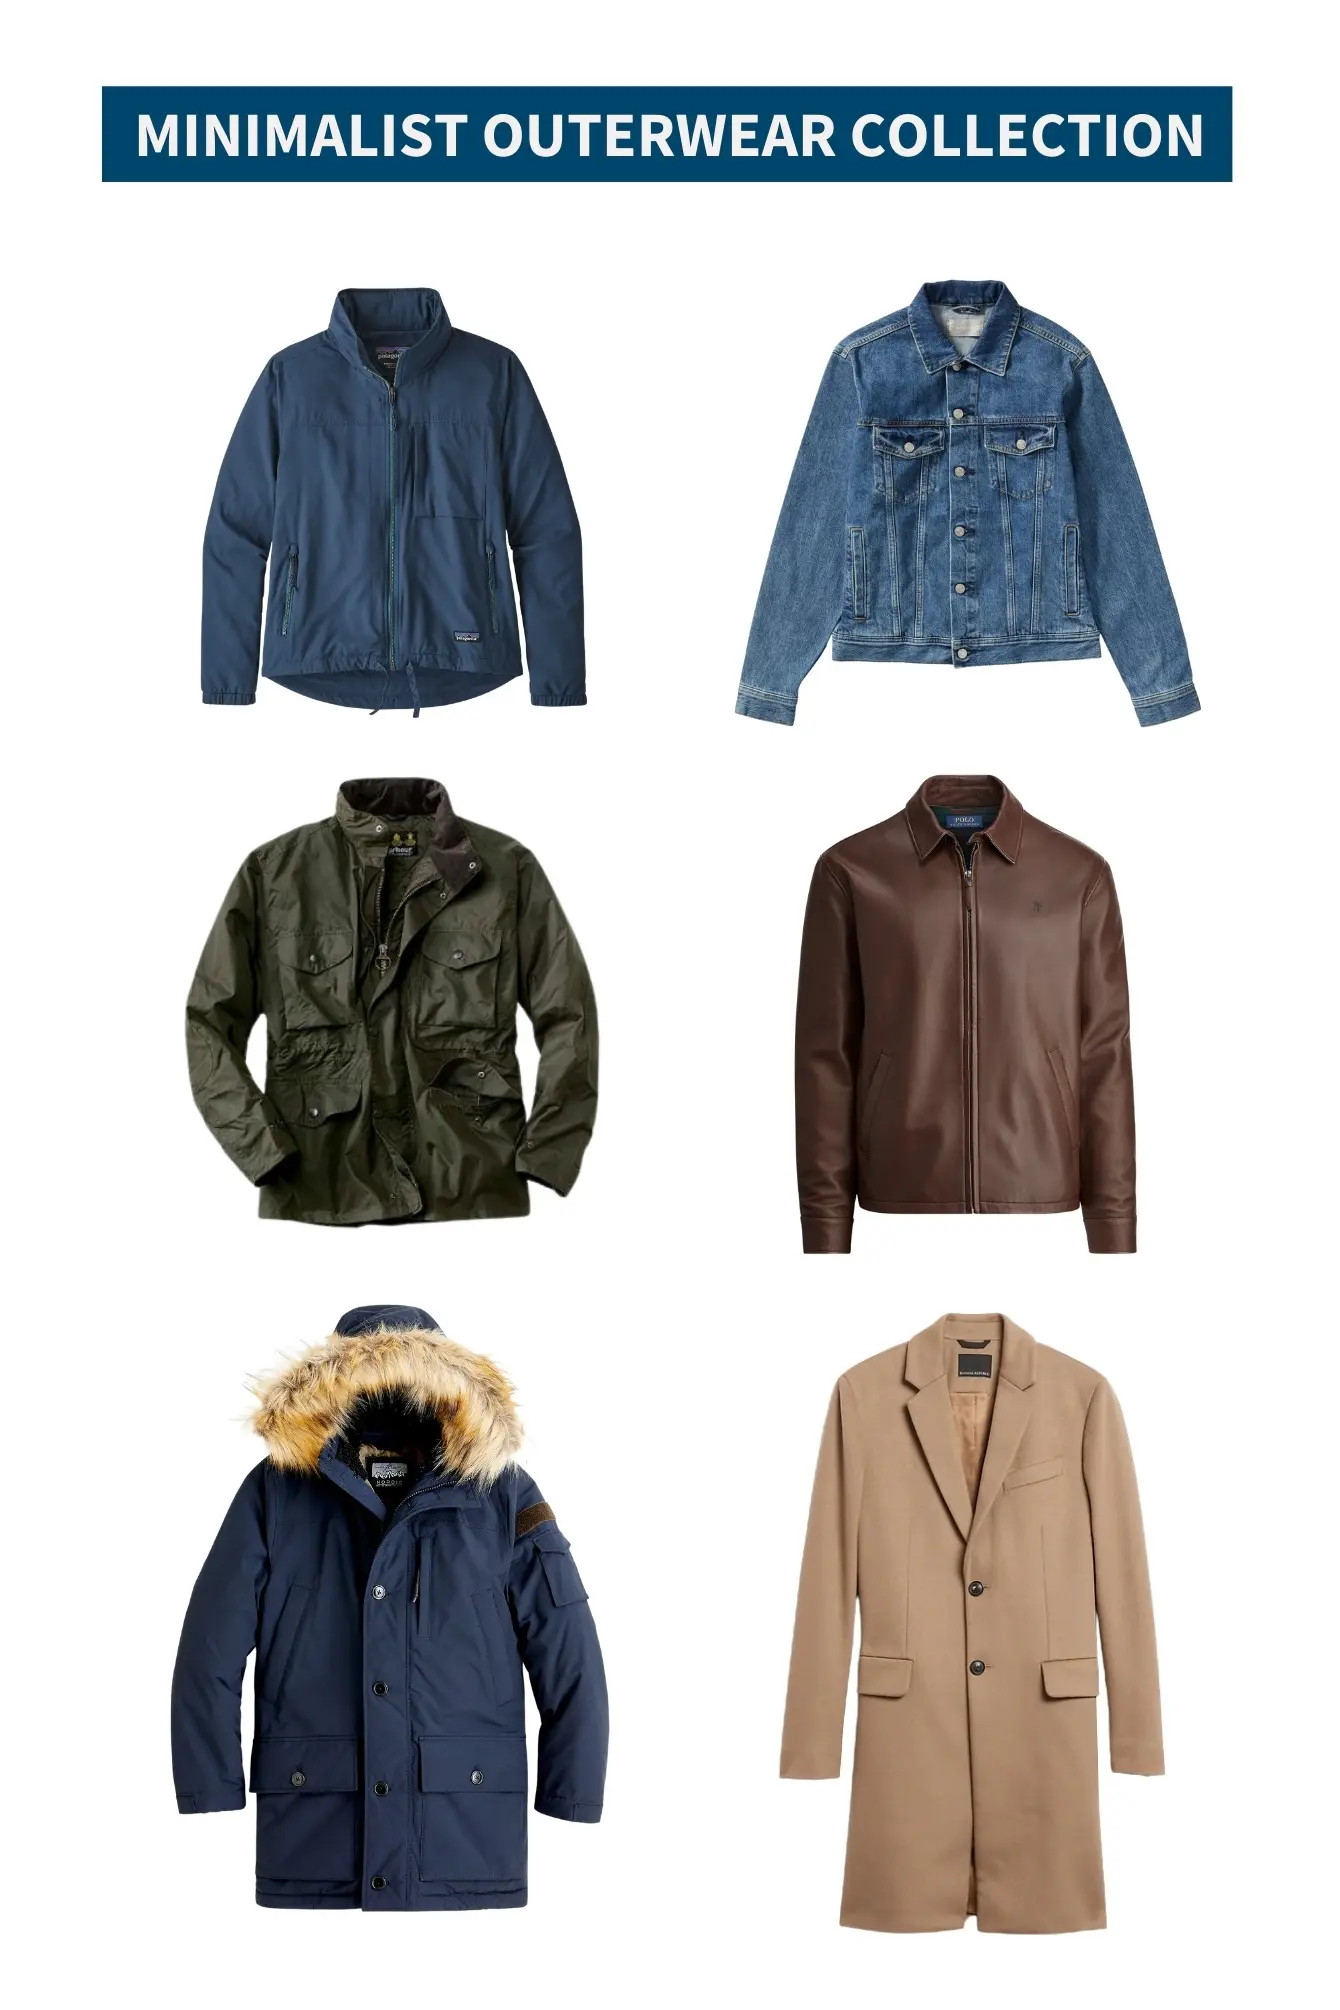 Minimal outerwear collection